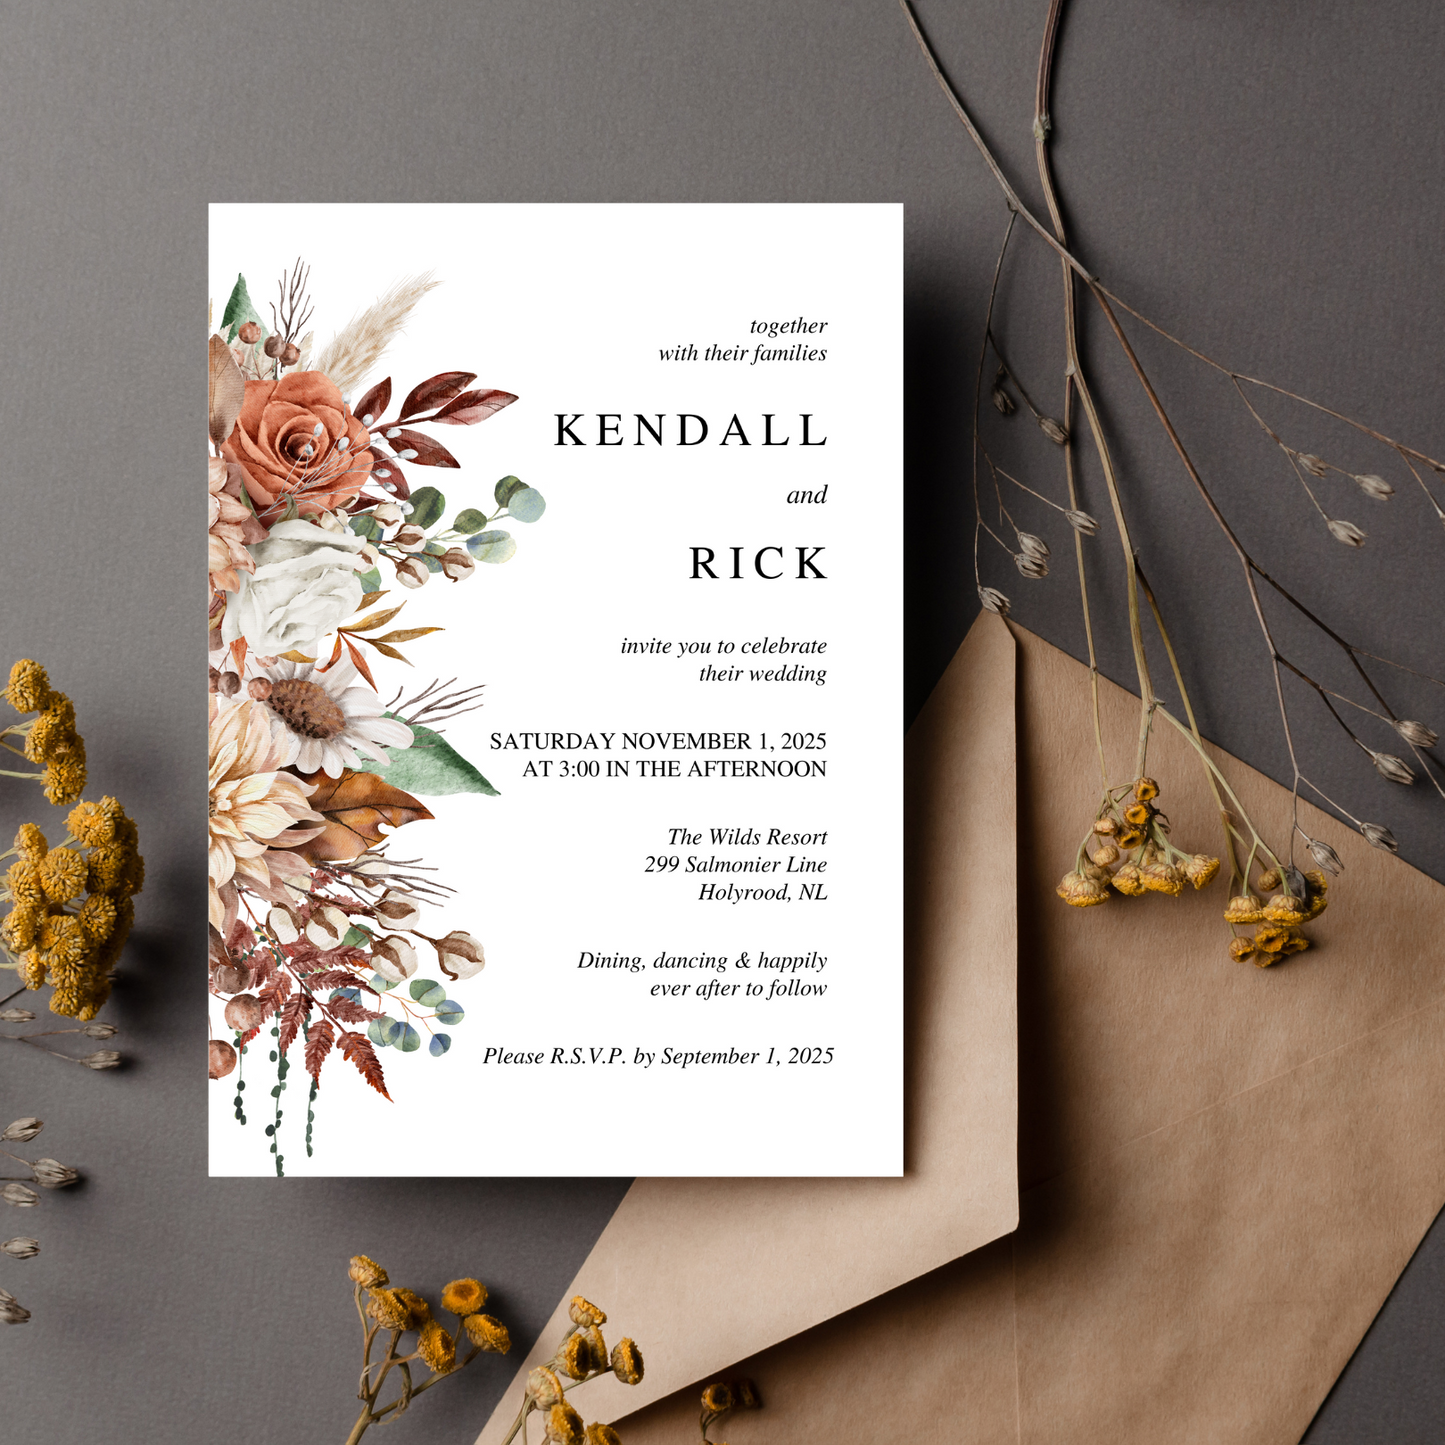 A white invitation with a fall coloured bouquet on it's left hand side sits on a charcoal background. There is a kraft paper envelope nestled underneath the wedding invitation with small dark yellow flowers dotting the background.